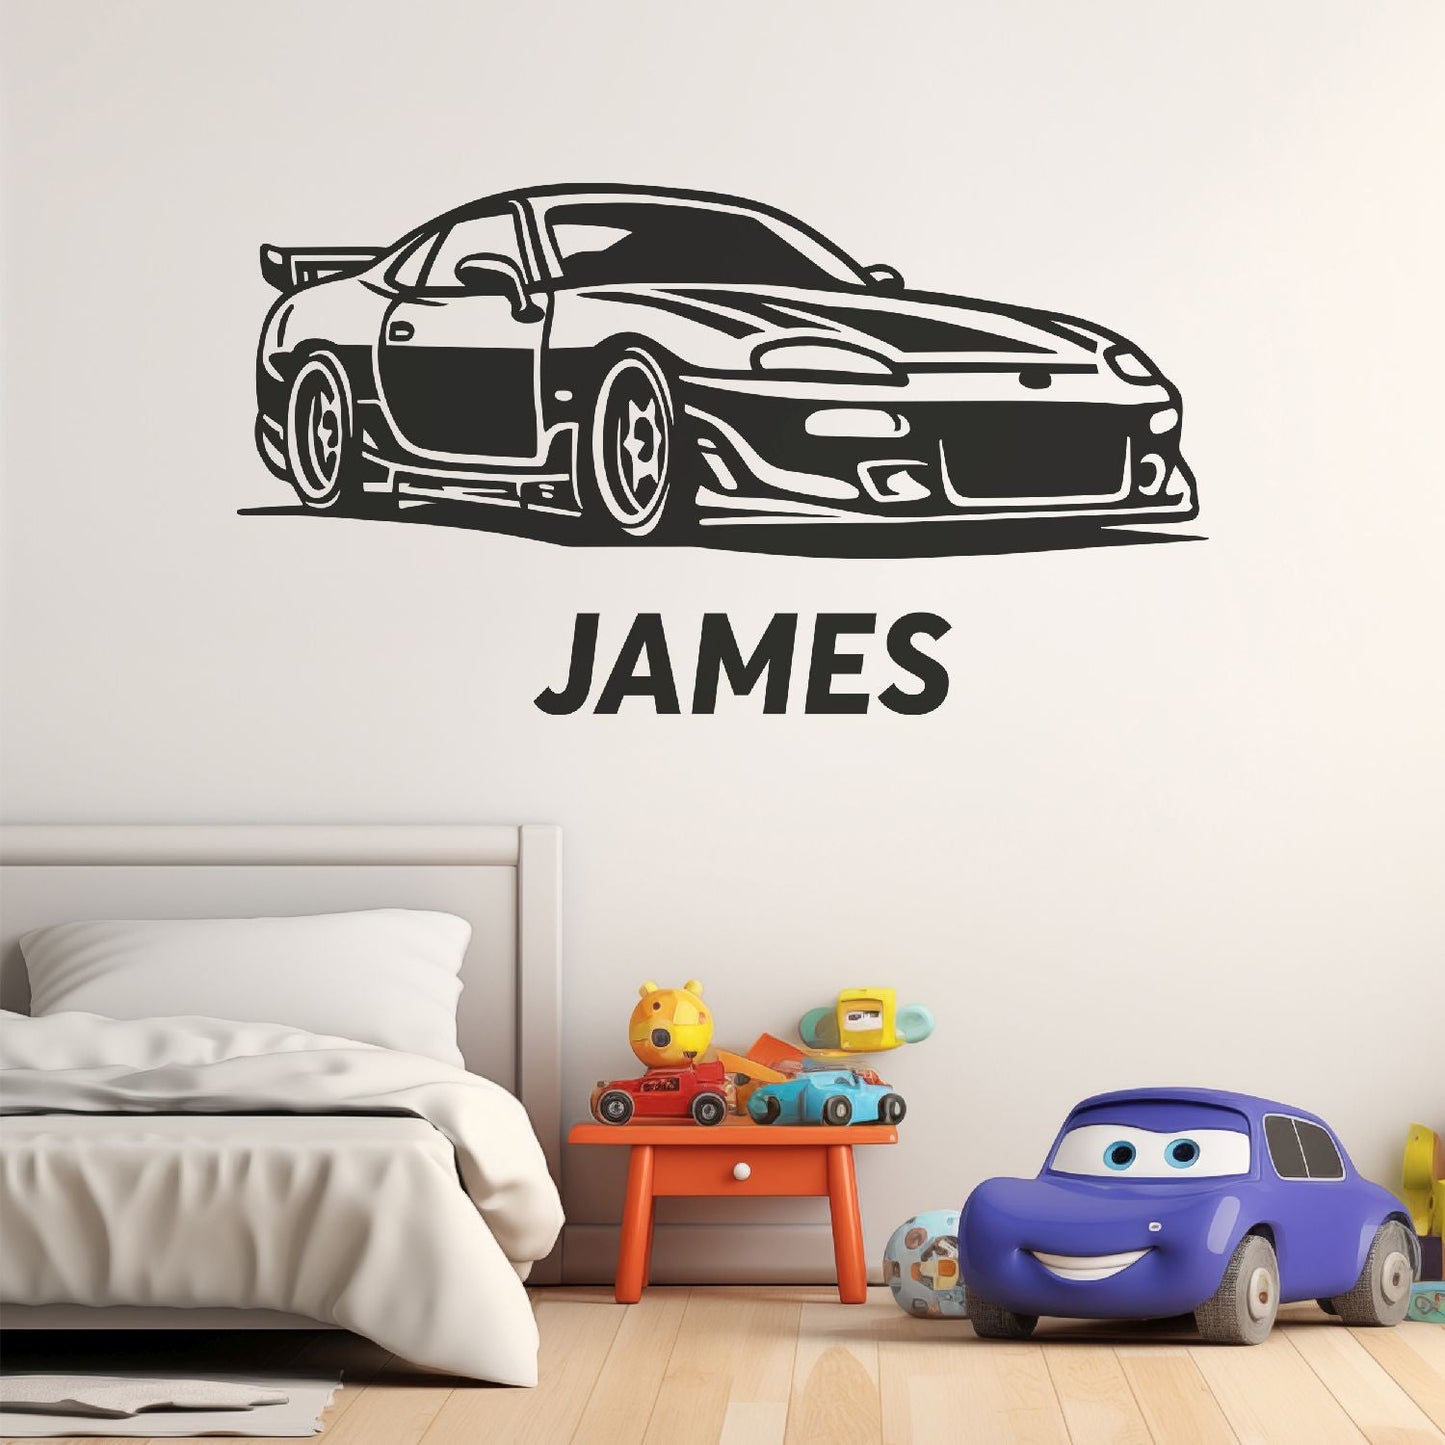 Race Car Wall Decals - Boys Race Car Wall Decal - Custom Racing Name Wall Decal - Personalized Room Decor - Cars Decals for Boys Room